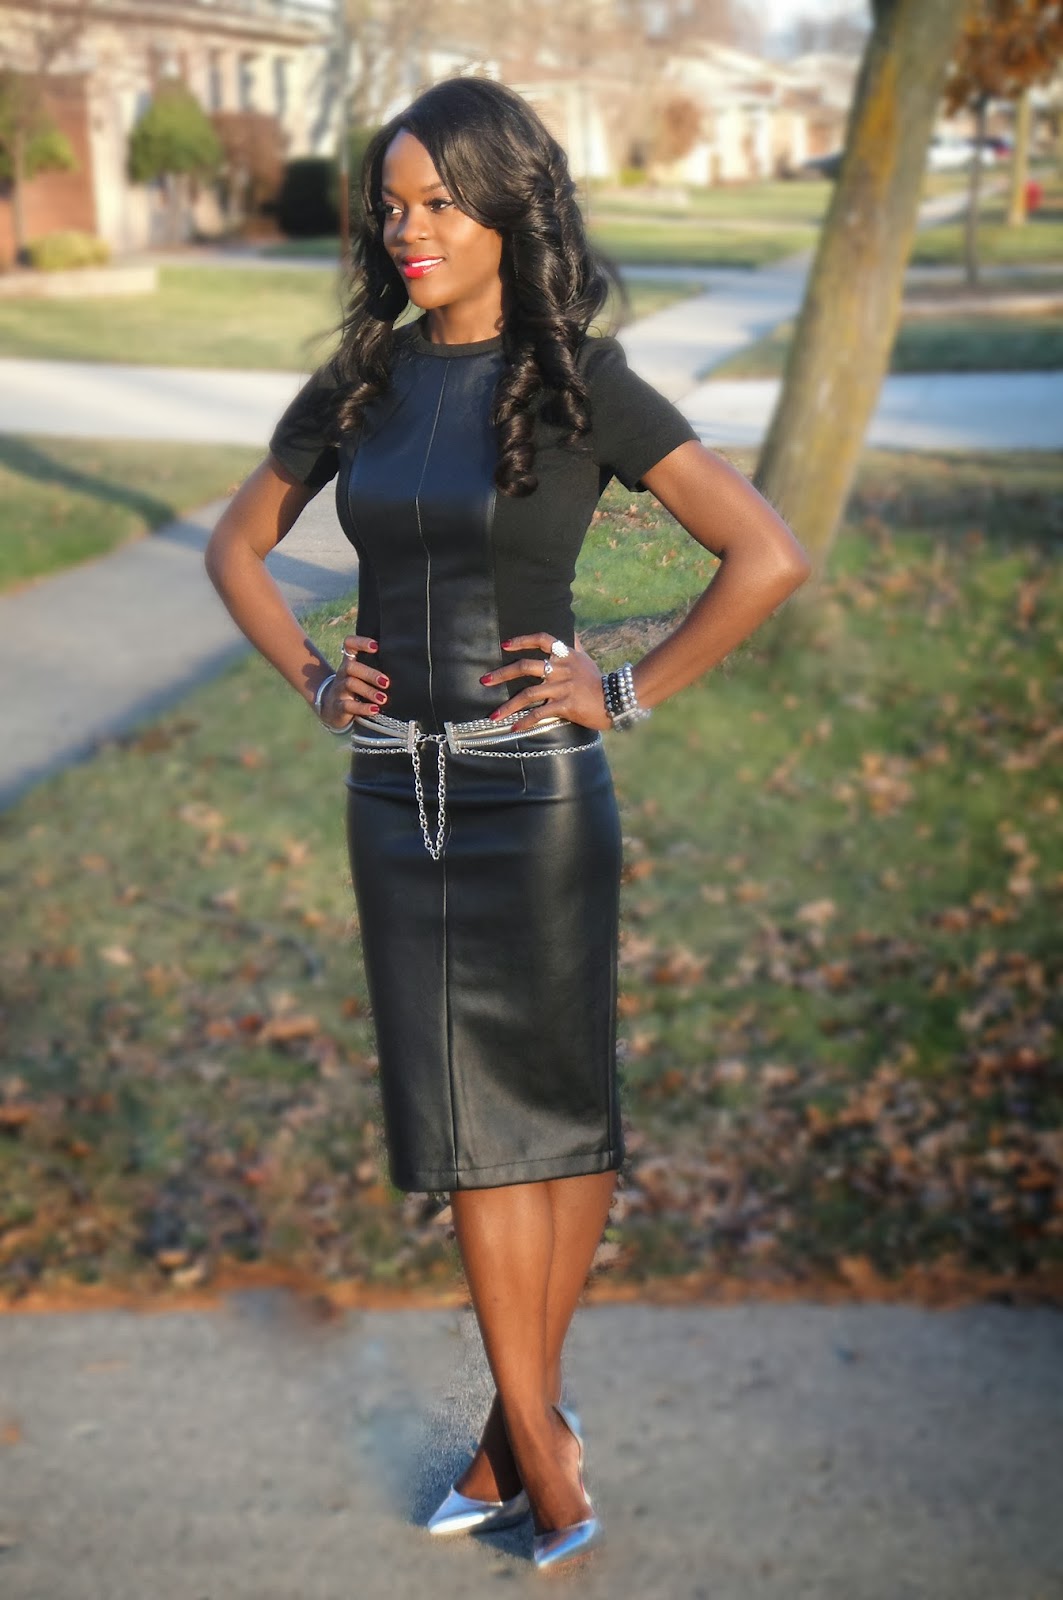 Black Leather Dress and Silver Tones - Cranberry Tantrums